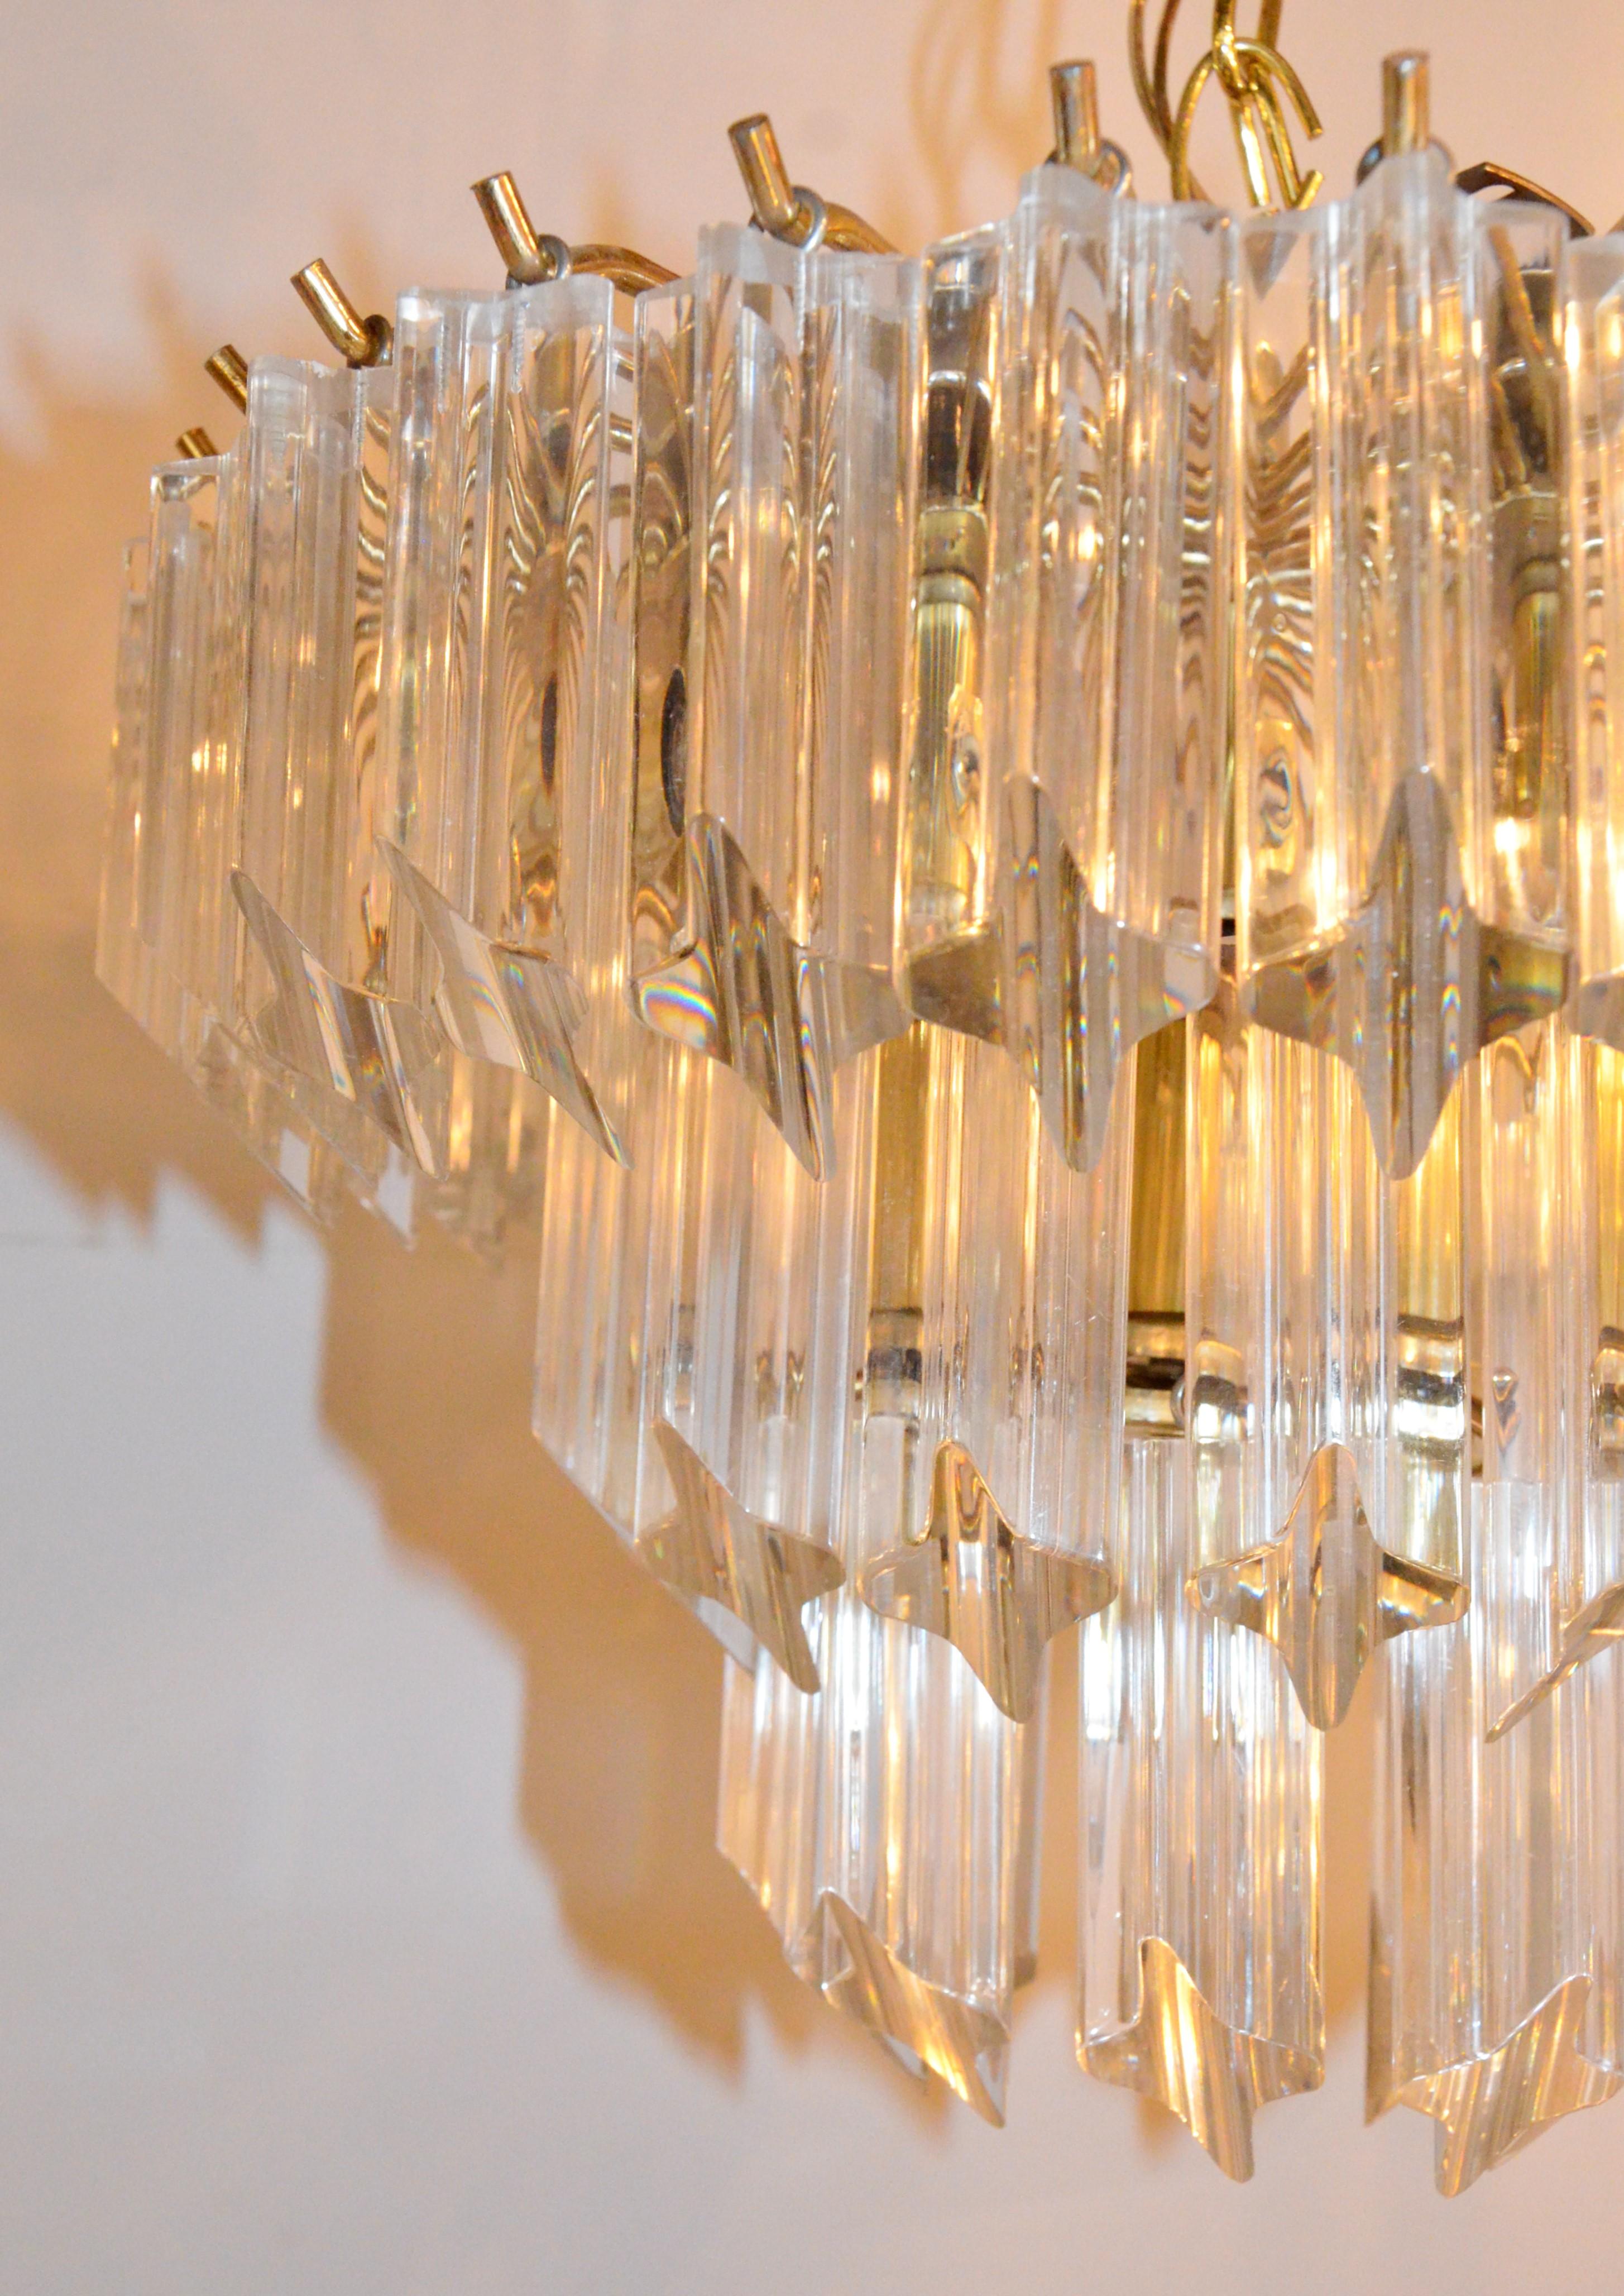 Lucite Hanging Triad Prisms with Brass Frame Venini Style Flushmount Chandelier For Sale 5